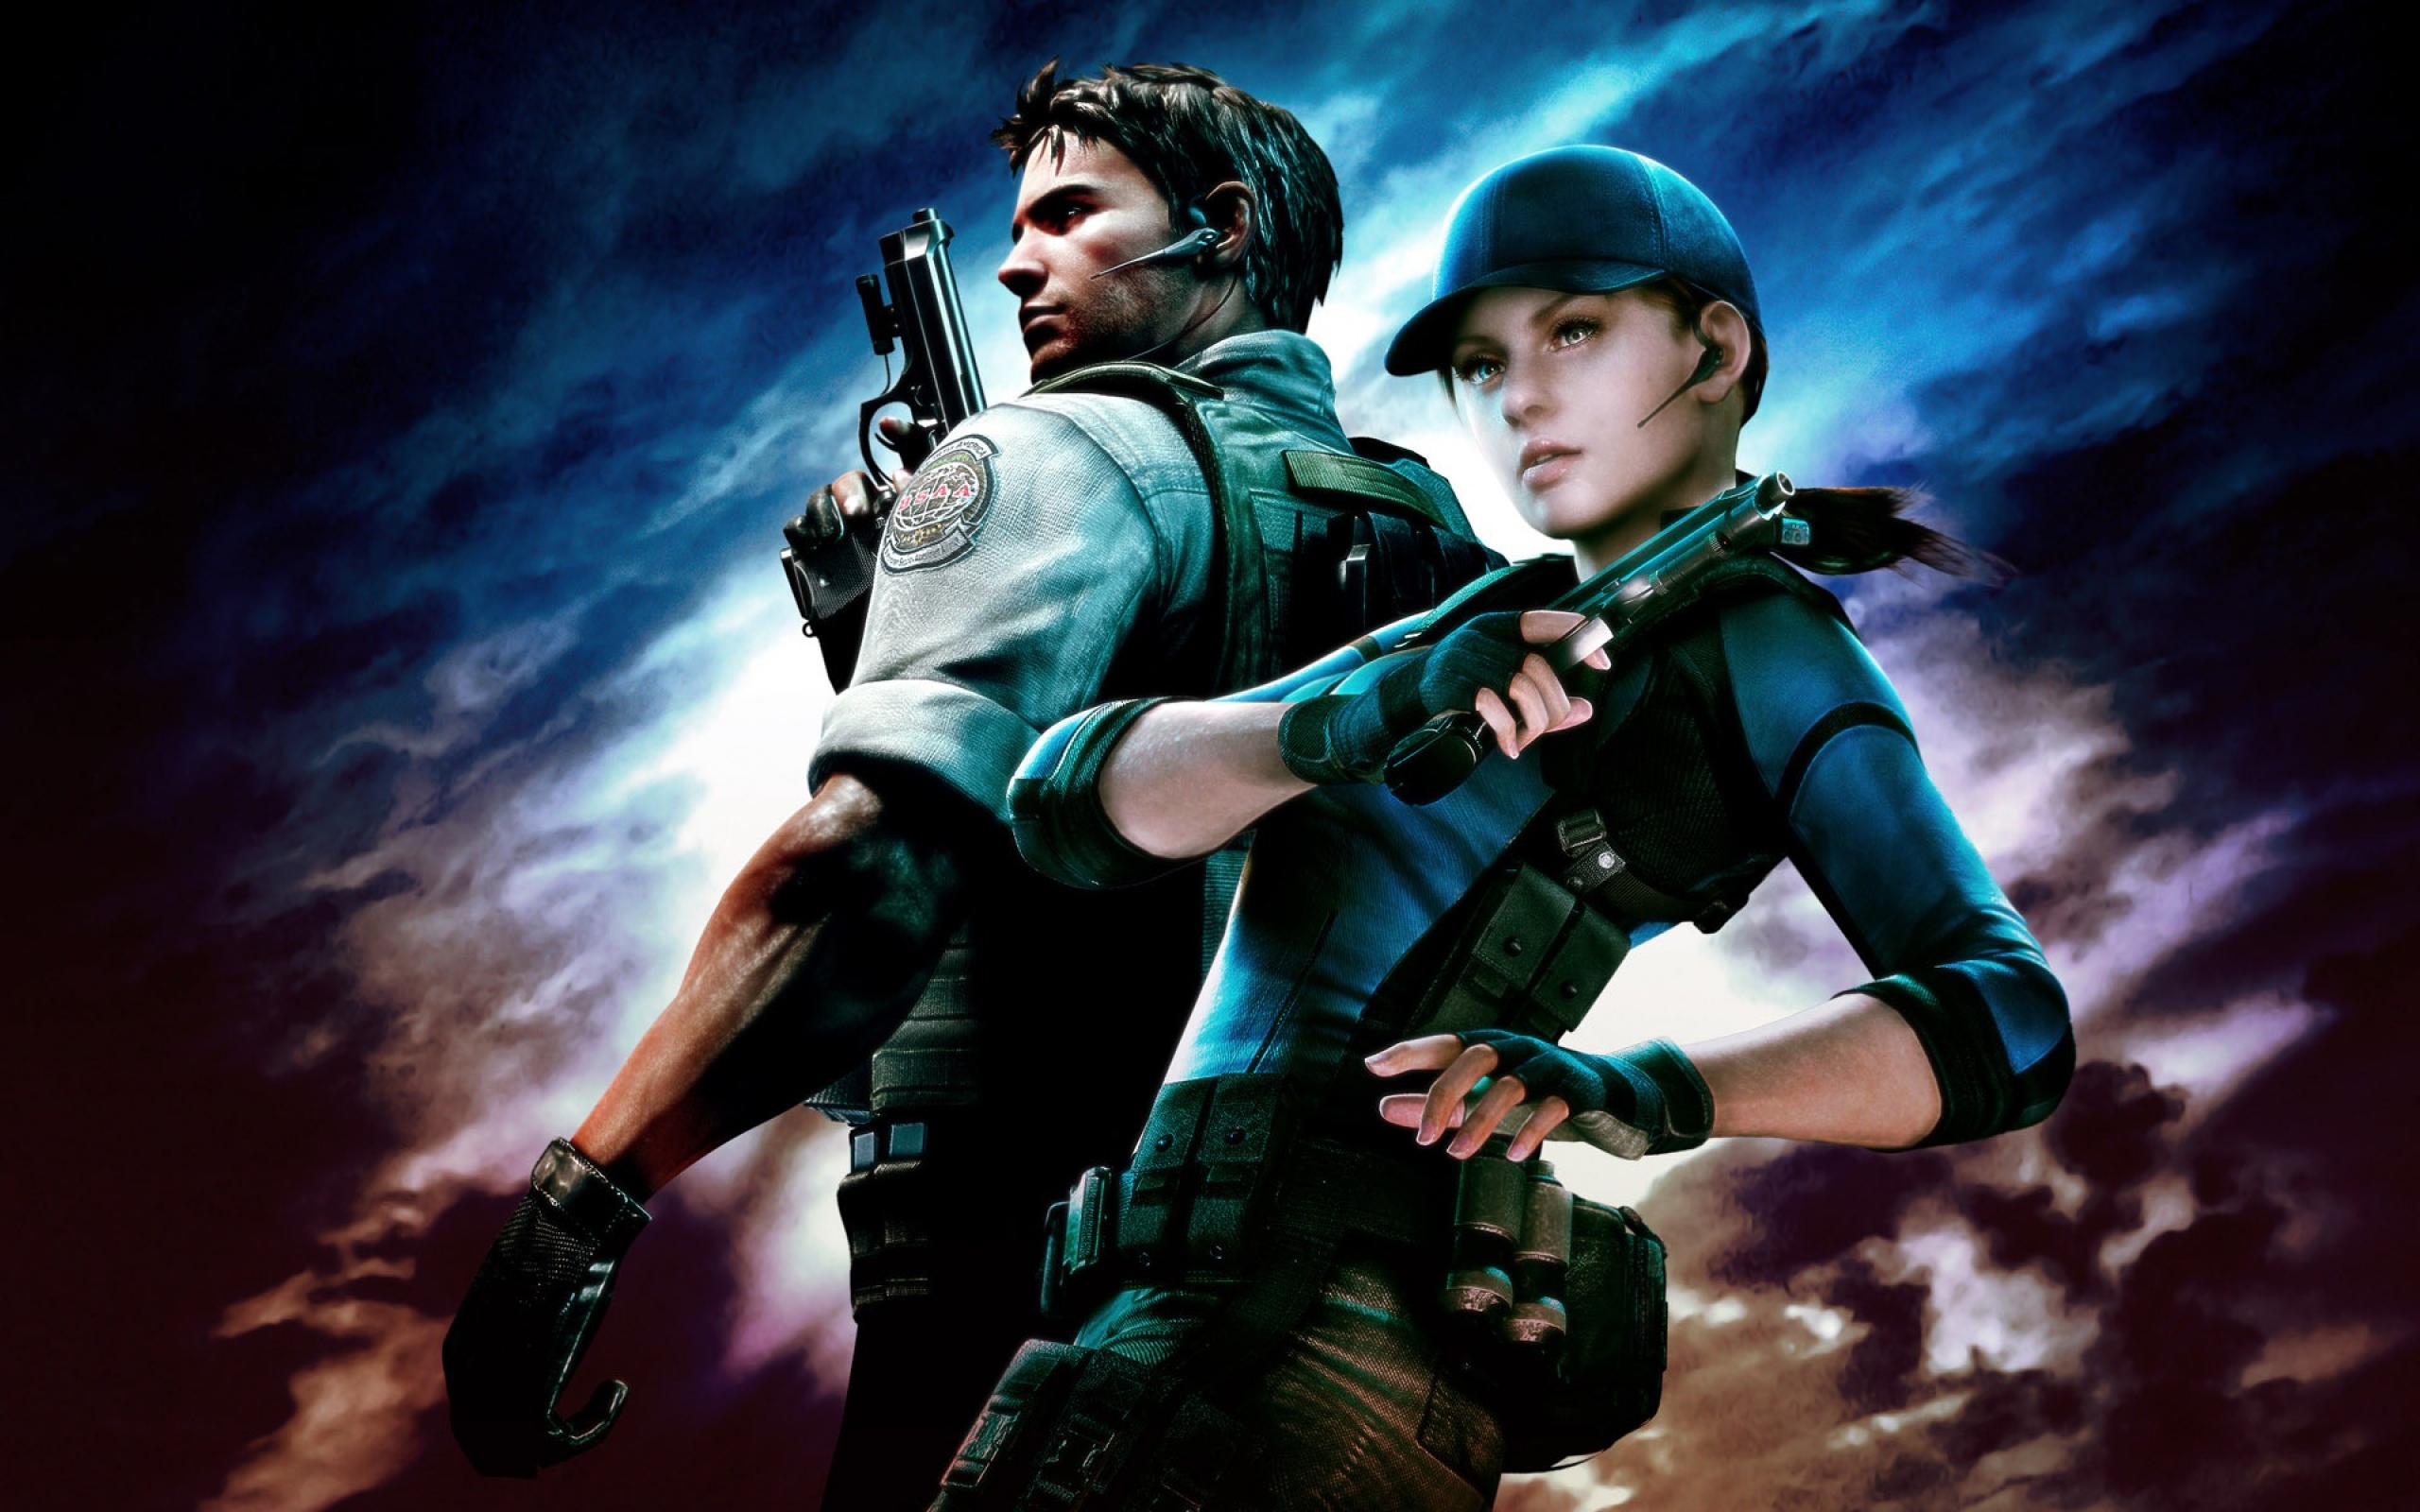 Chris Redfield and Jill Valentine from Resident Evil 5 in action-packed video game scene.